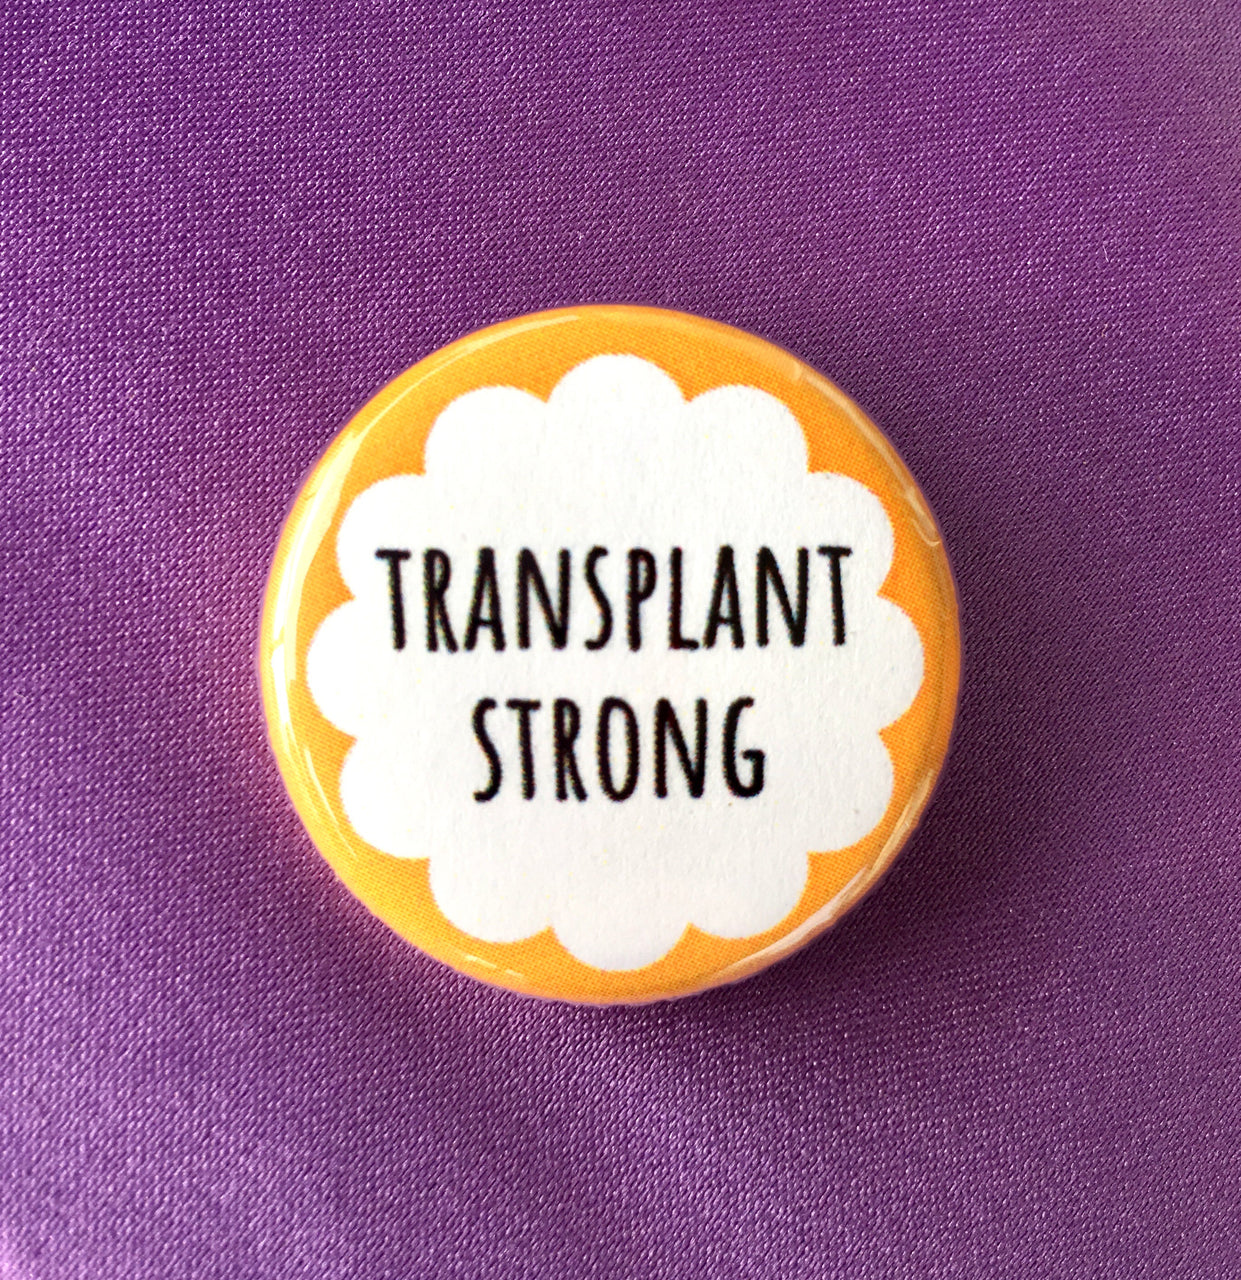 Transplant strong - Radical Buttons